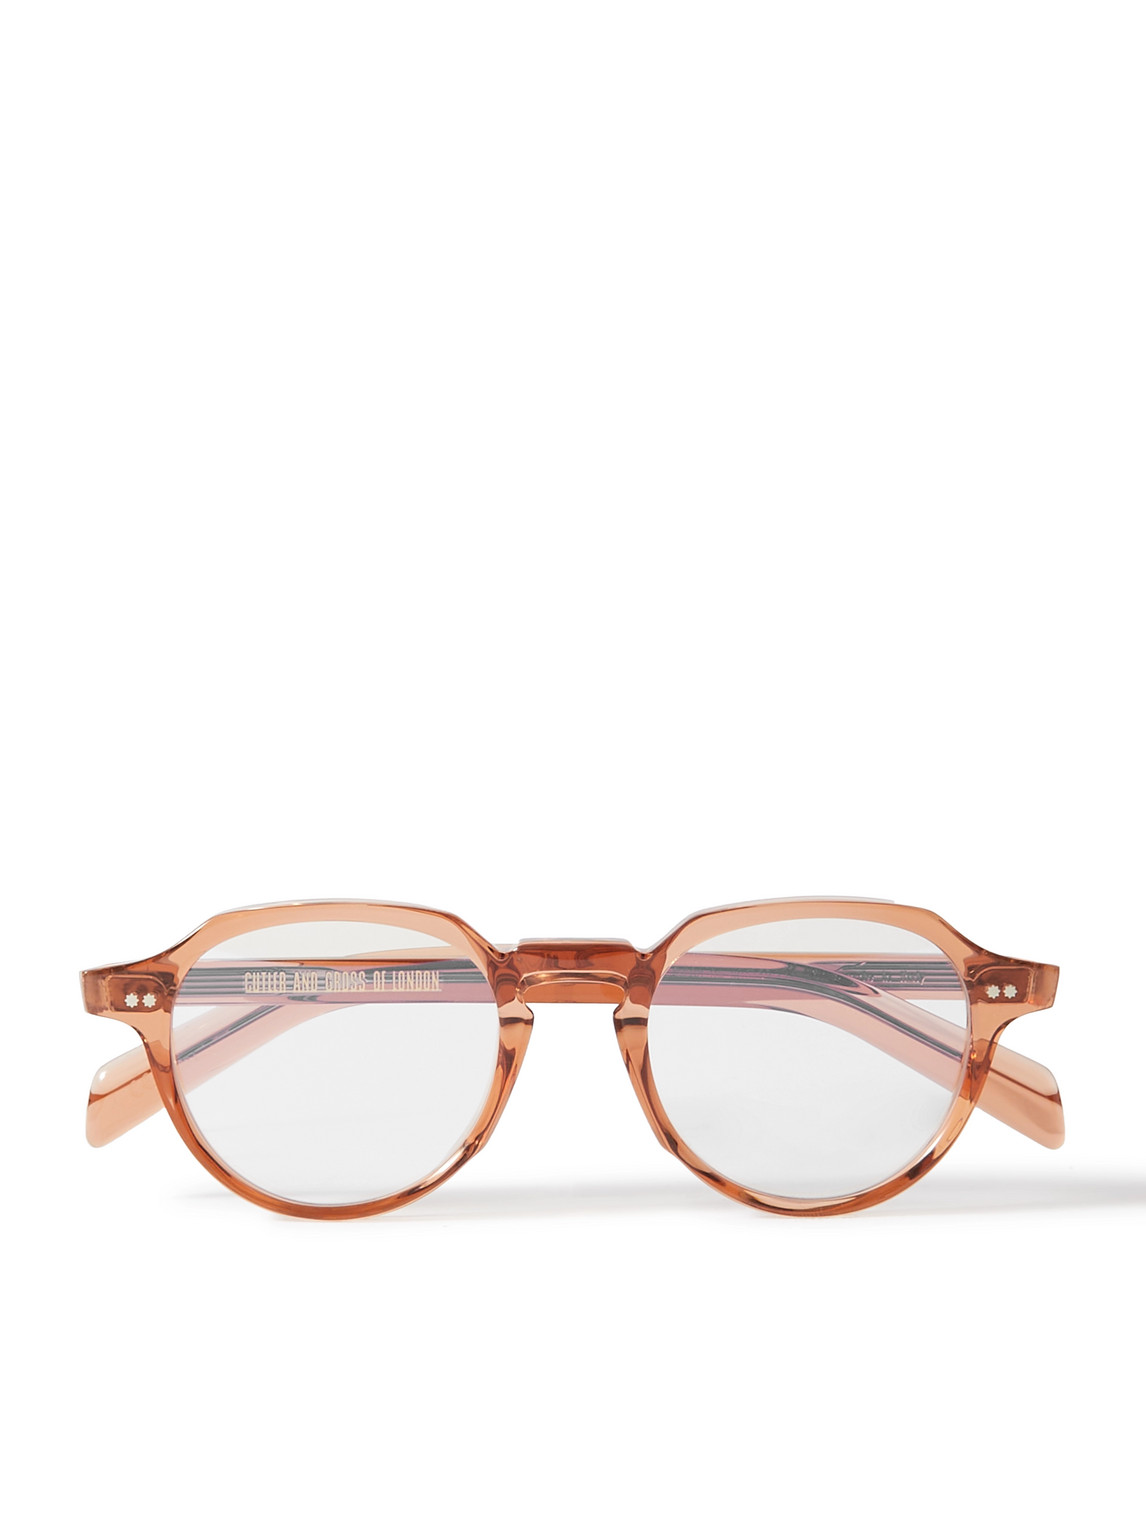 Cutler And Gross Gr06 Round-frame Acetate Optical Glasses In Metallic